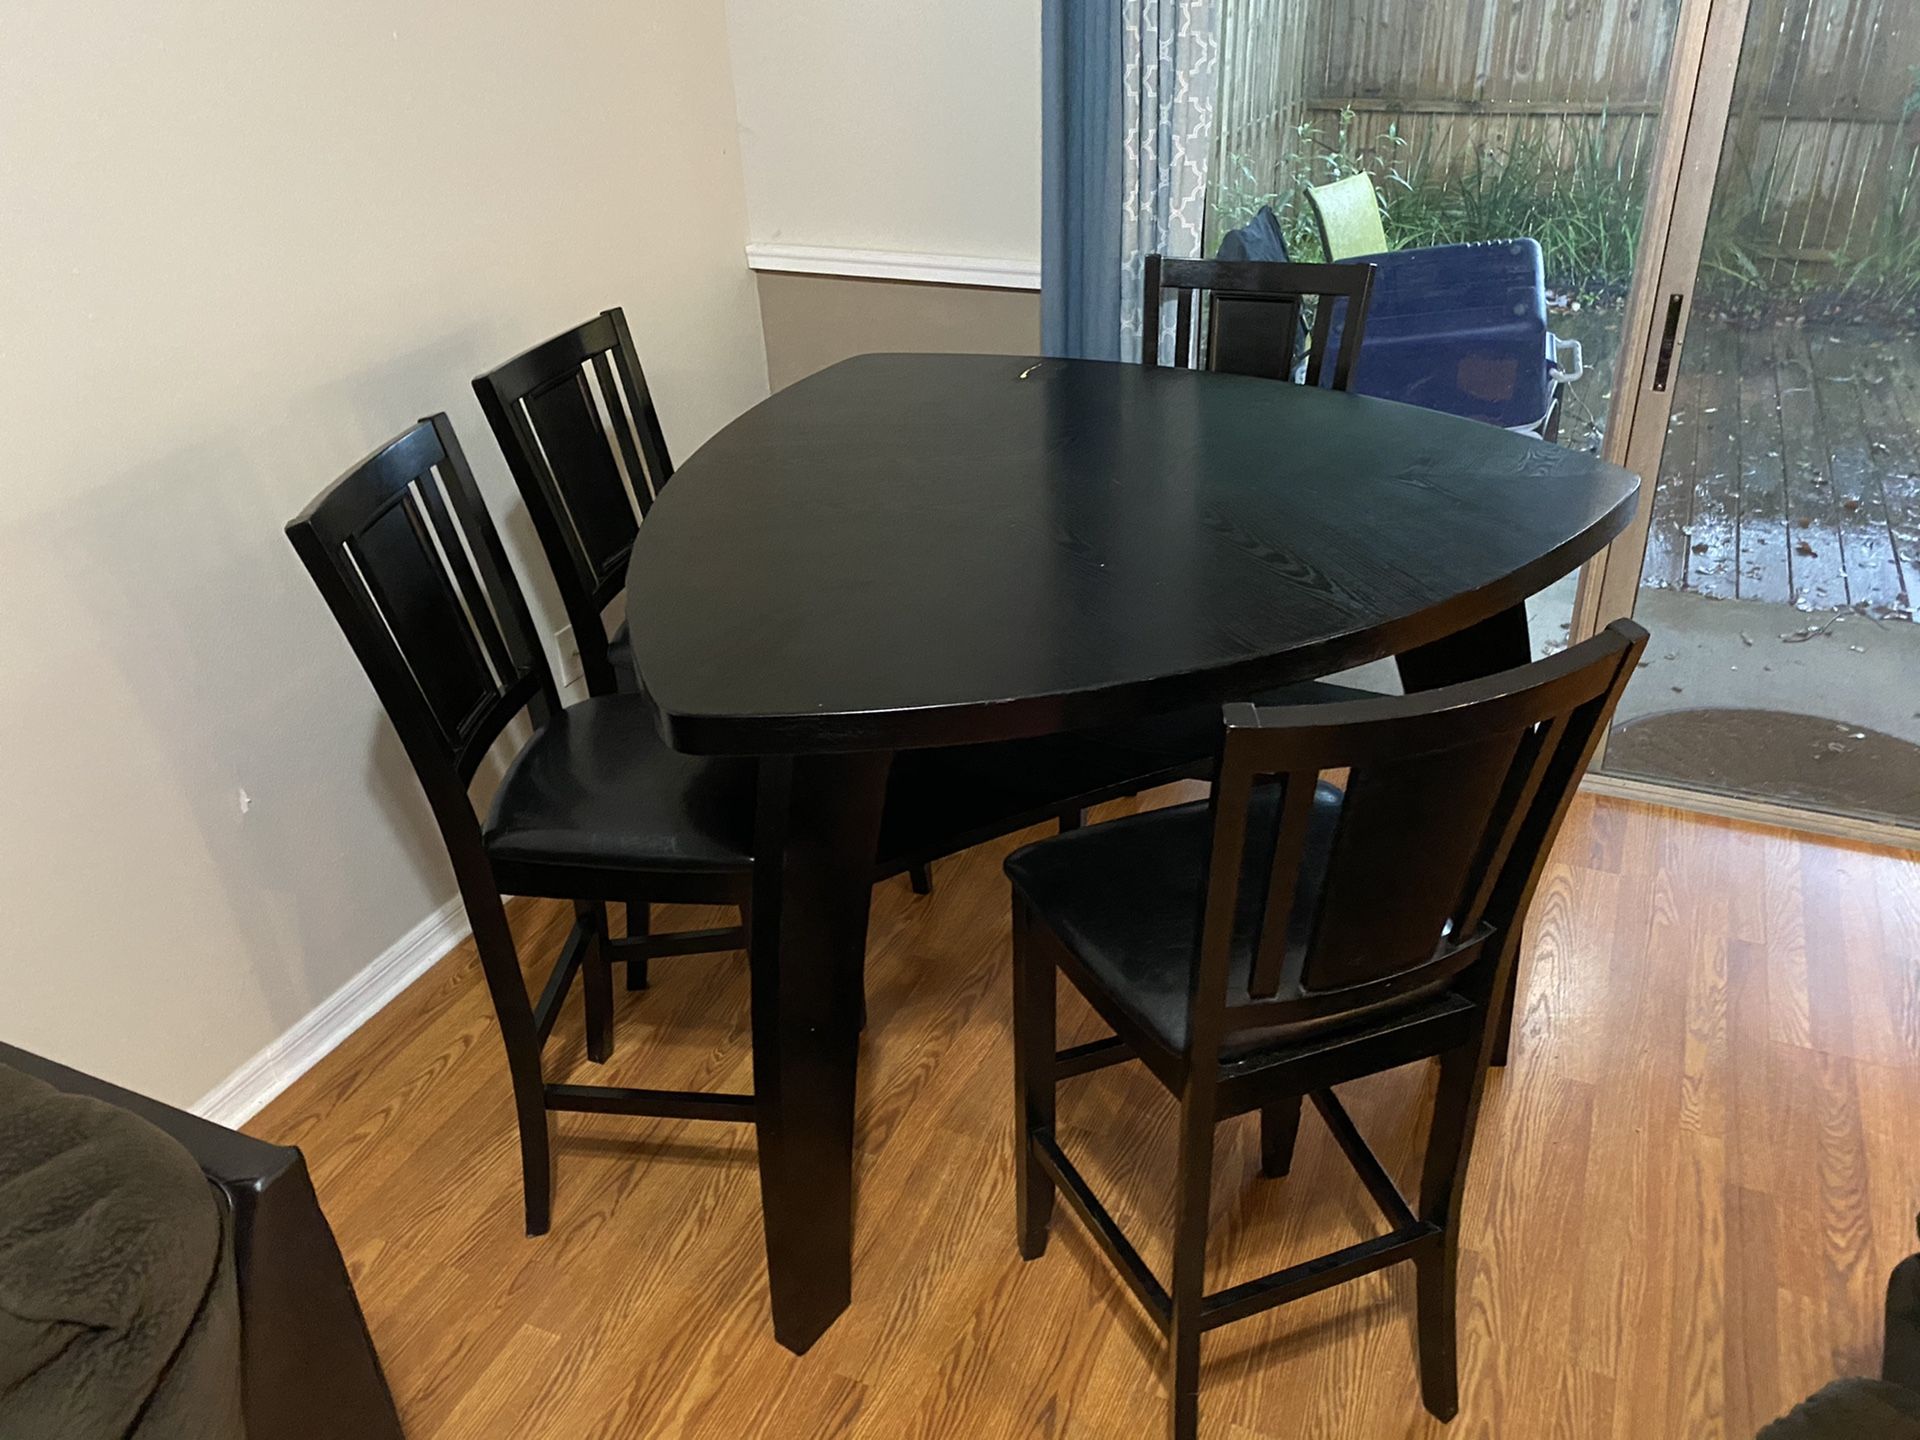 High top kitchen table